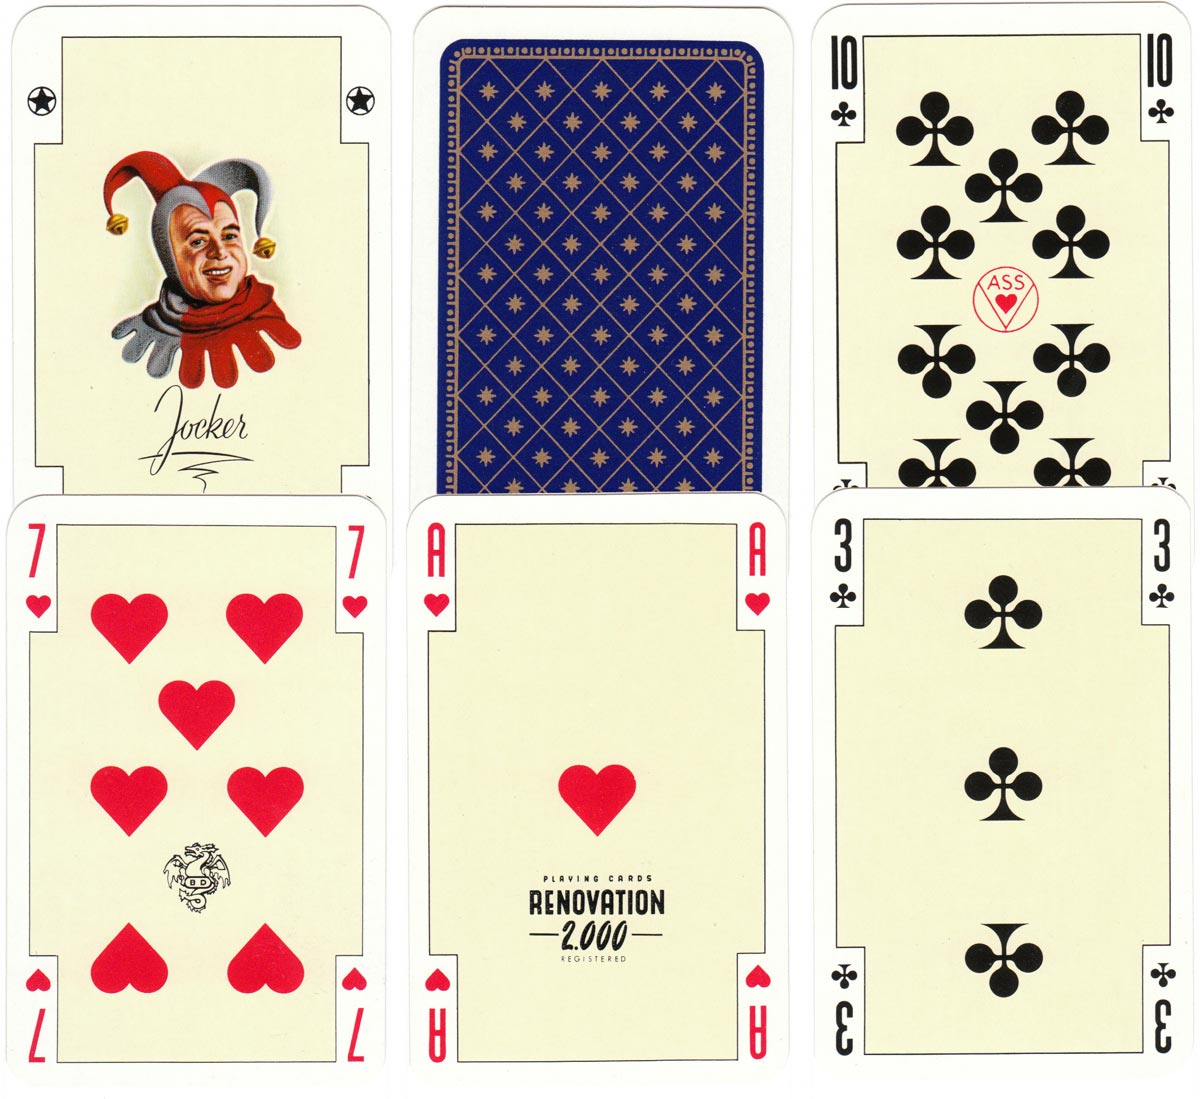 Renovation 2.000 playing cards manufactured by A.S.S., c.1958